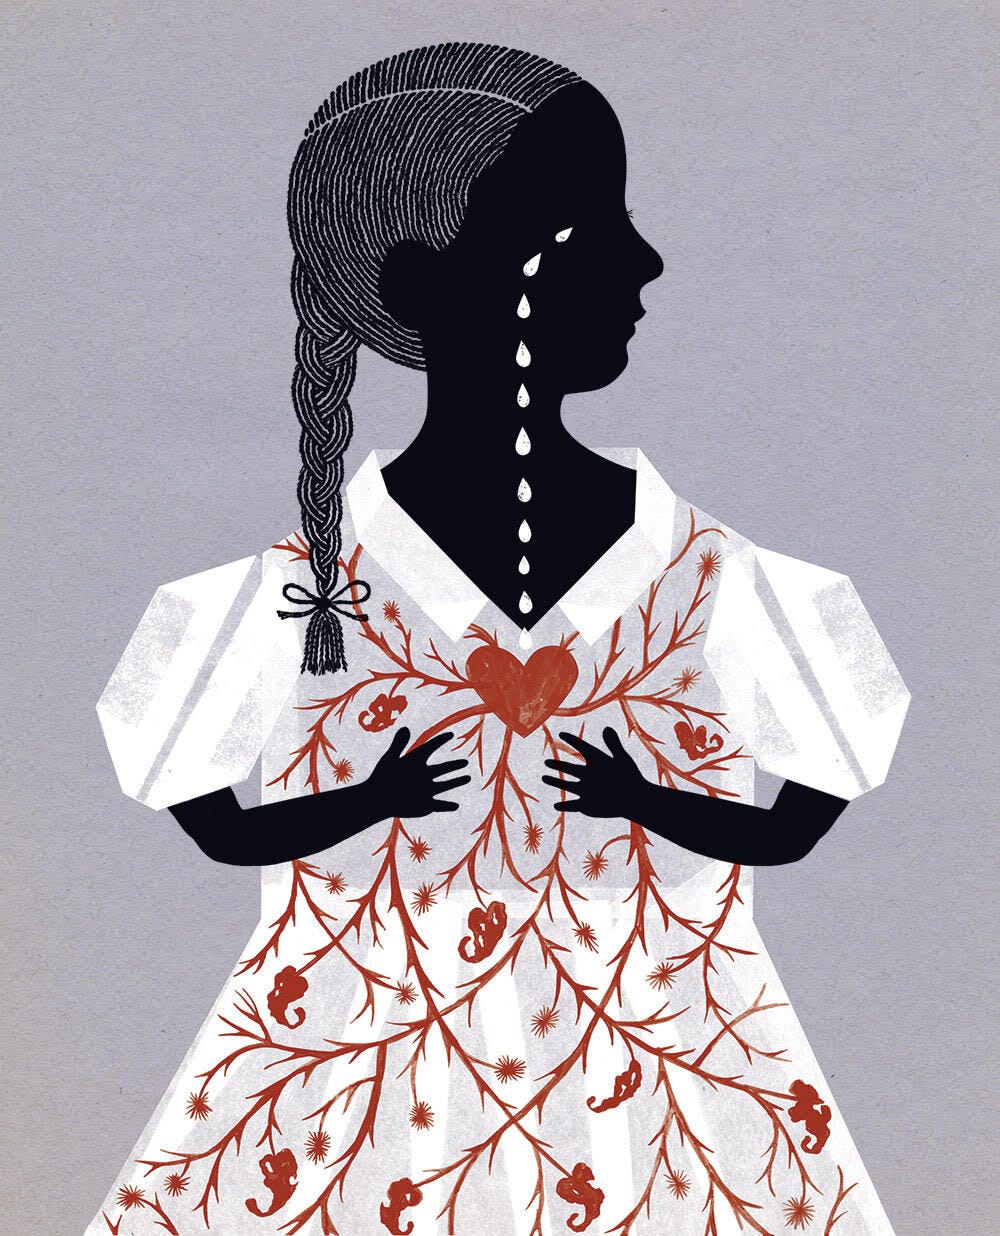 A two-dimensional figure of a little girl with a braided pony tail looks off to the right of the image in profile, with a trail of tears on her cheek. She wears a white dress with a red pattern that incudes branches, peppers and a heart in the centre.